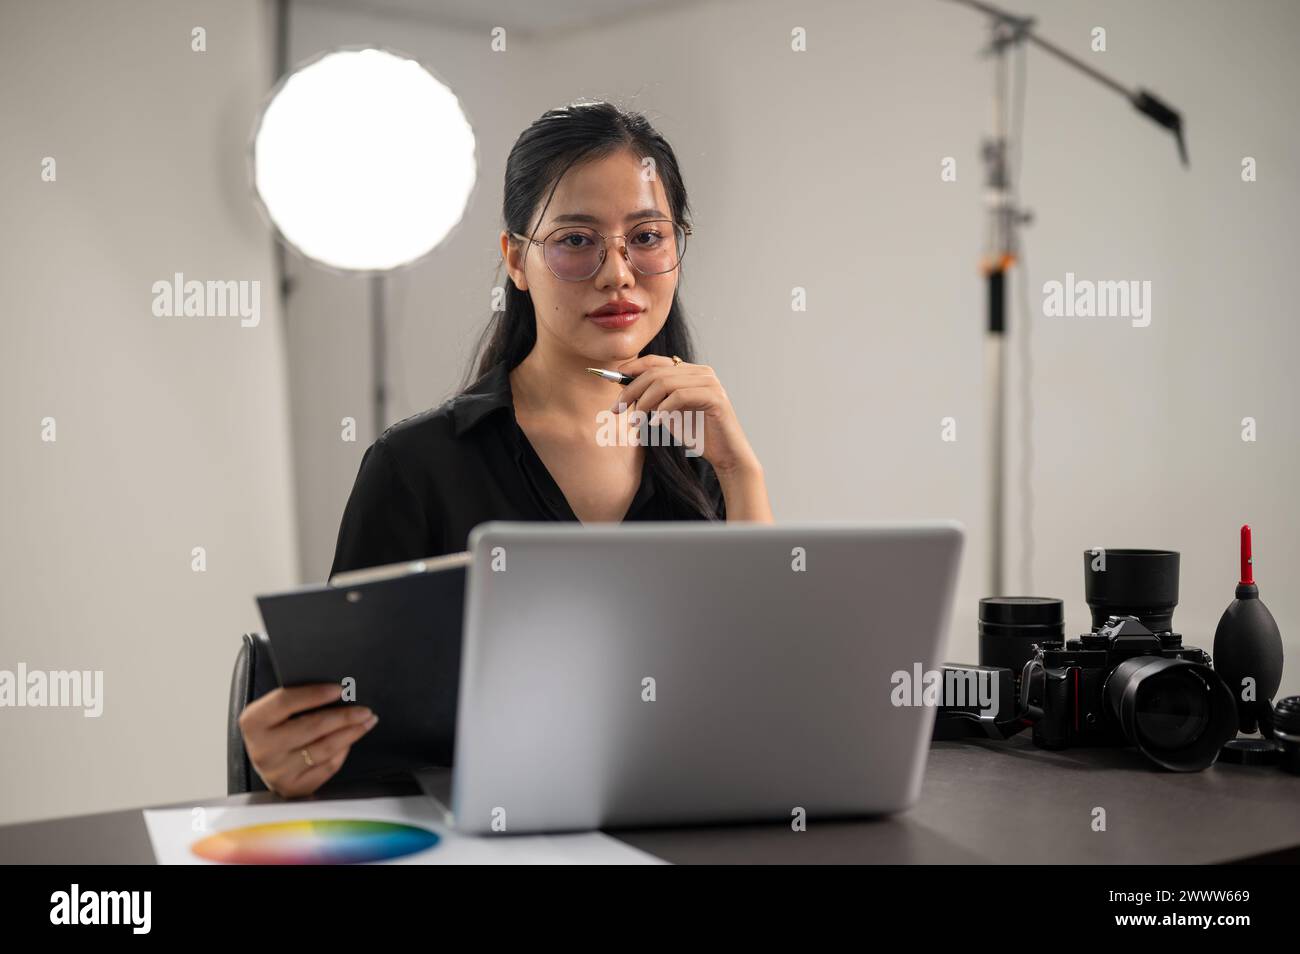 An attractive, confident Asian female photographer is looking at the camera while sitting at a desk in a photoshoot studio. Stock Photo